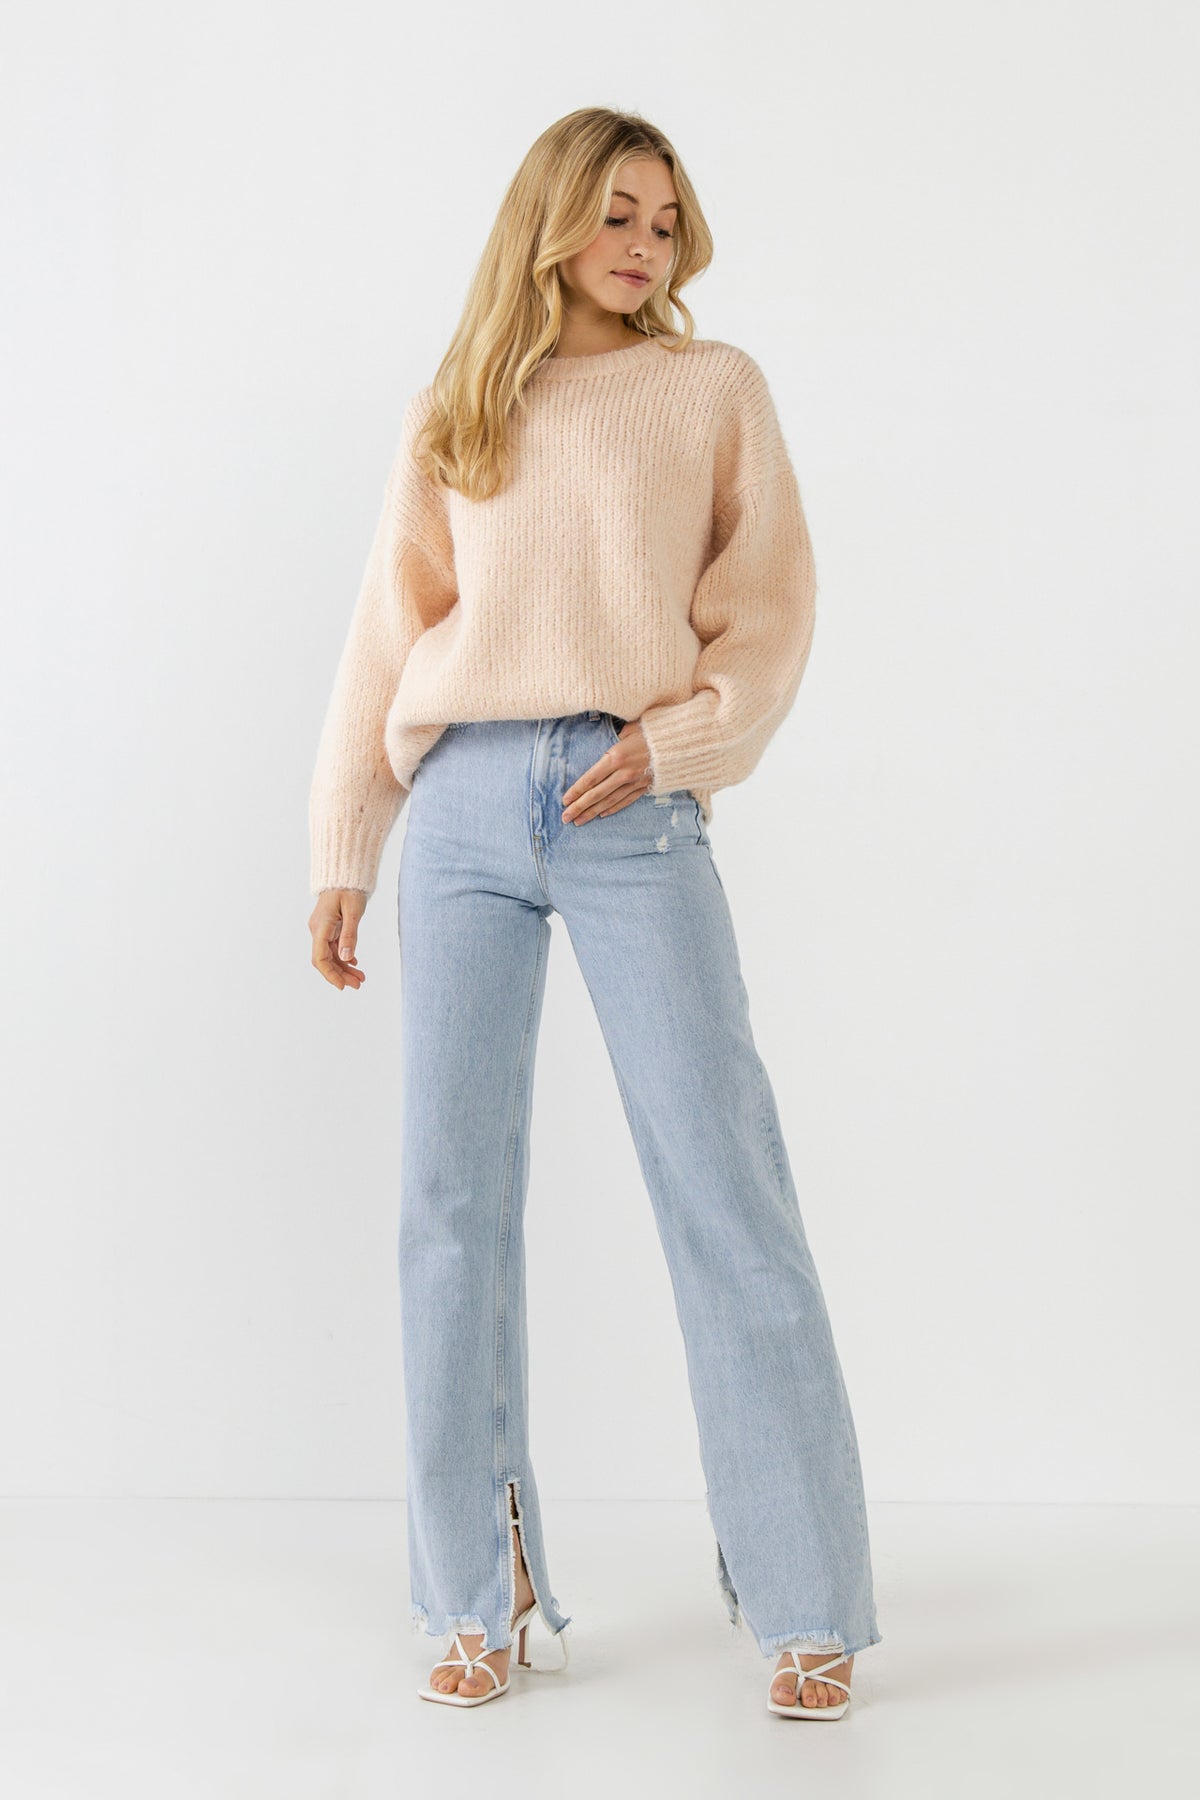 FREE THE ROSES - Oversized Chunky Knit Sweater - SWEATERS & KNITS available at Objectrare